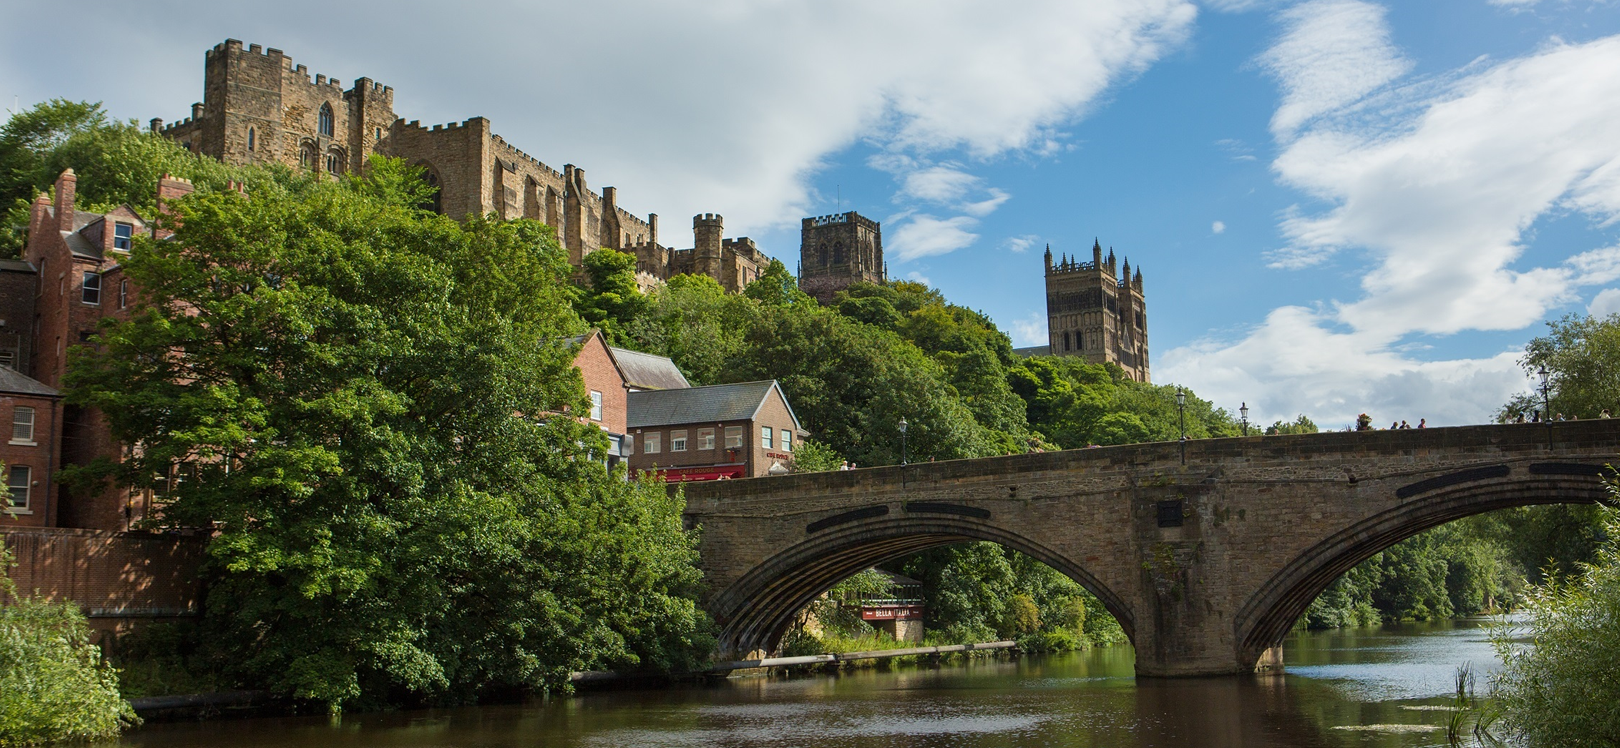 Durham’s World Heritage Site of Durham Cathedral and Durham Castle can be seen by visitors arriving at the new coach drop-off point at Framwelgate Waterside.